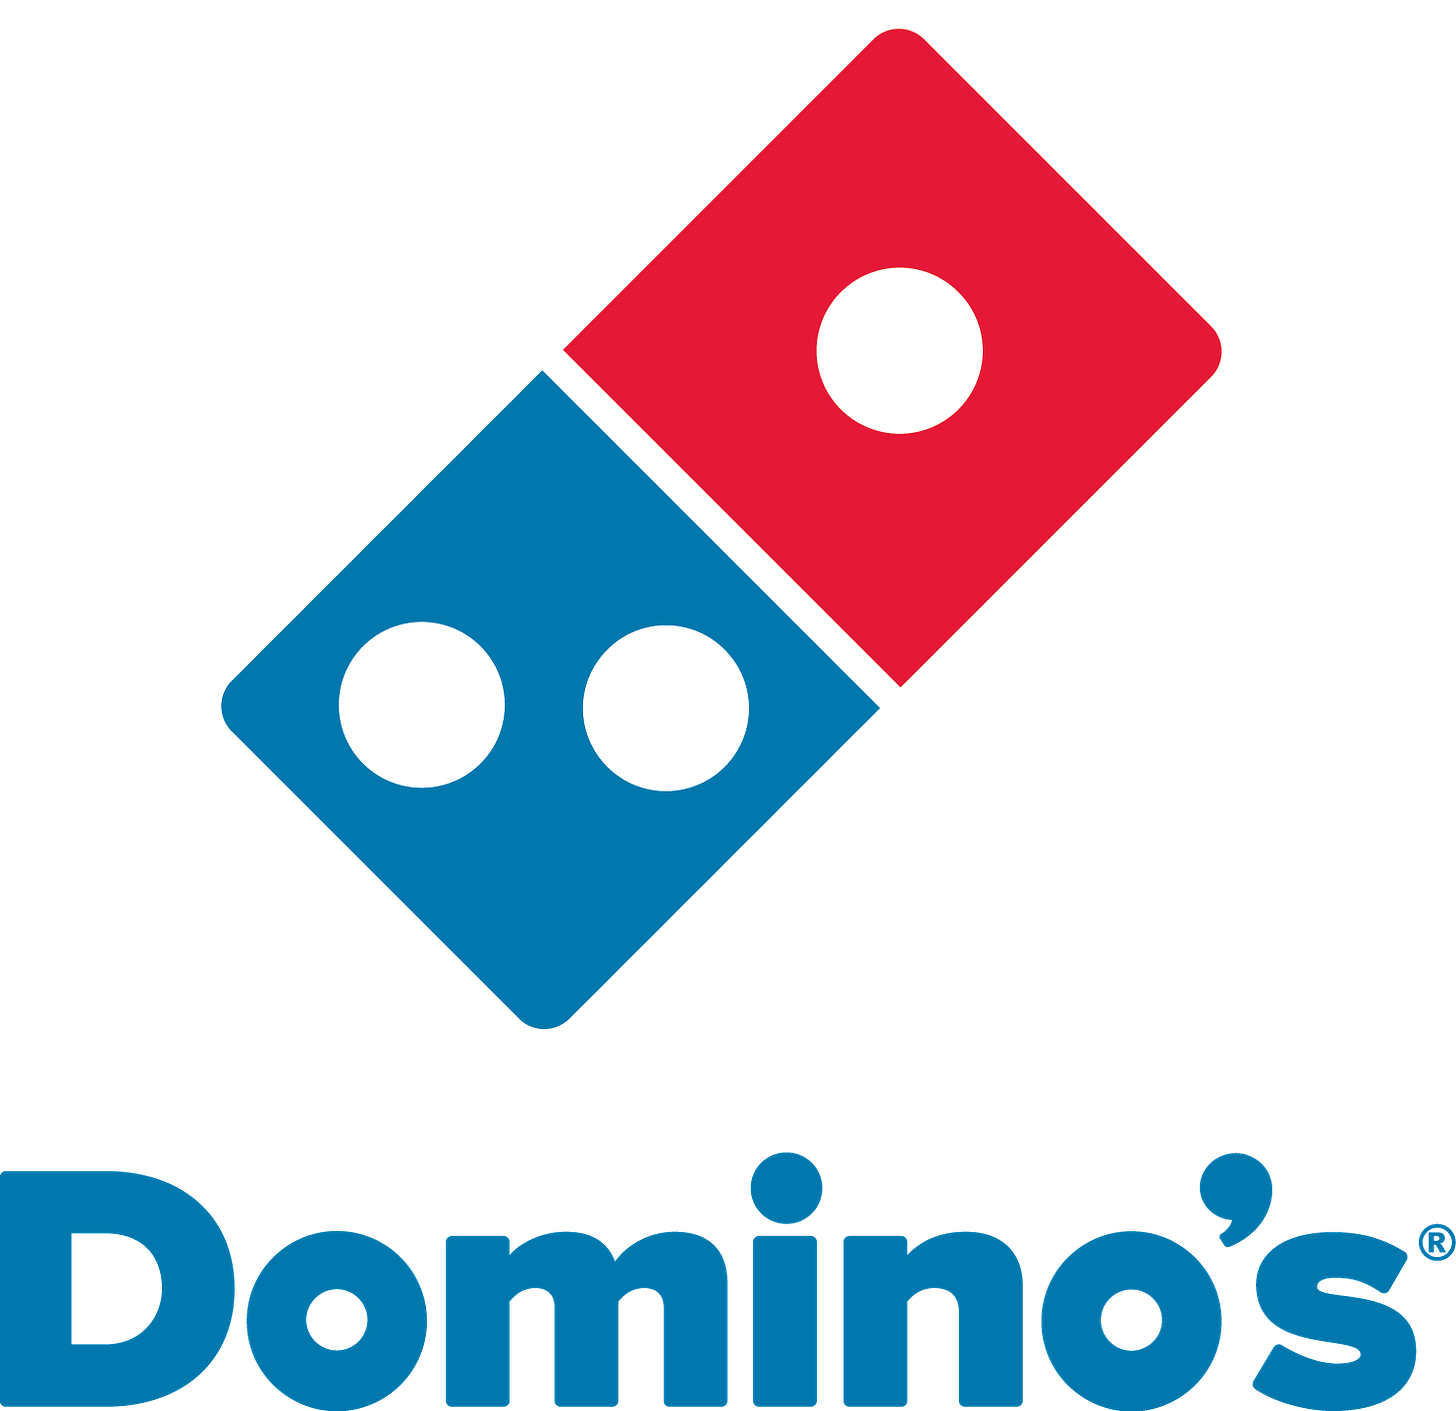 John Schwinghamer discusses the rationale for strengthening the position in Domino's Pizza, emphasizing the stock's attractive valuation and the expectation of resumed earnings growth.